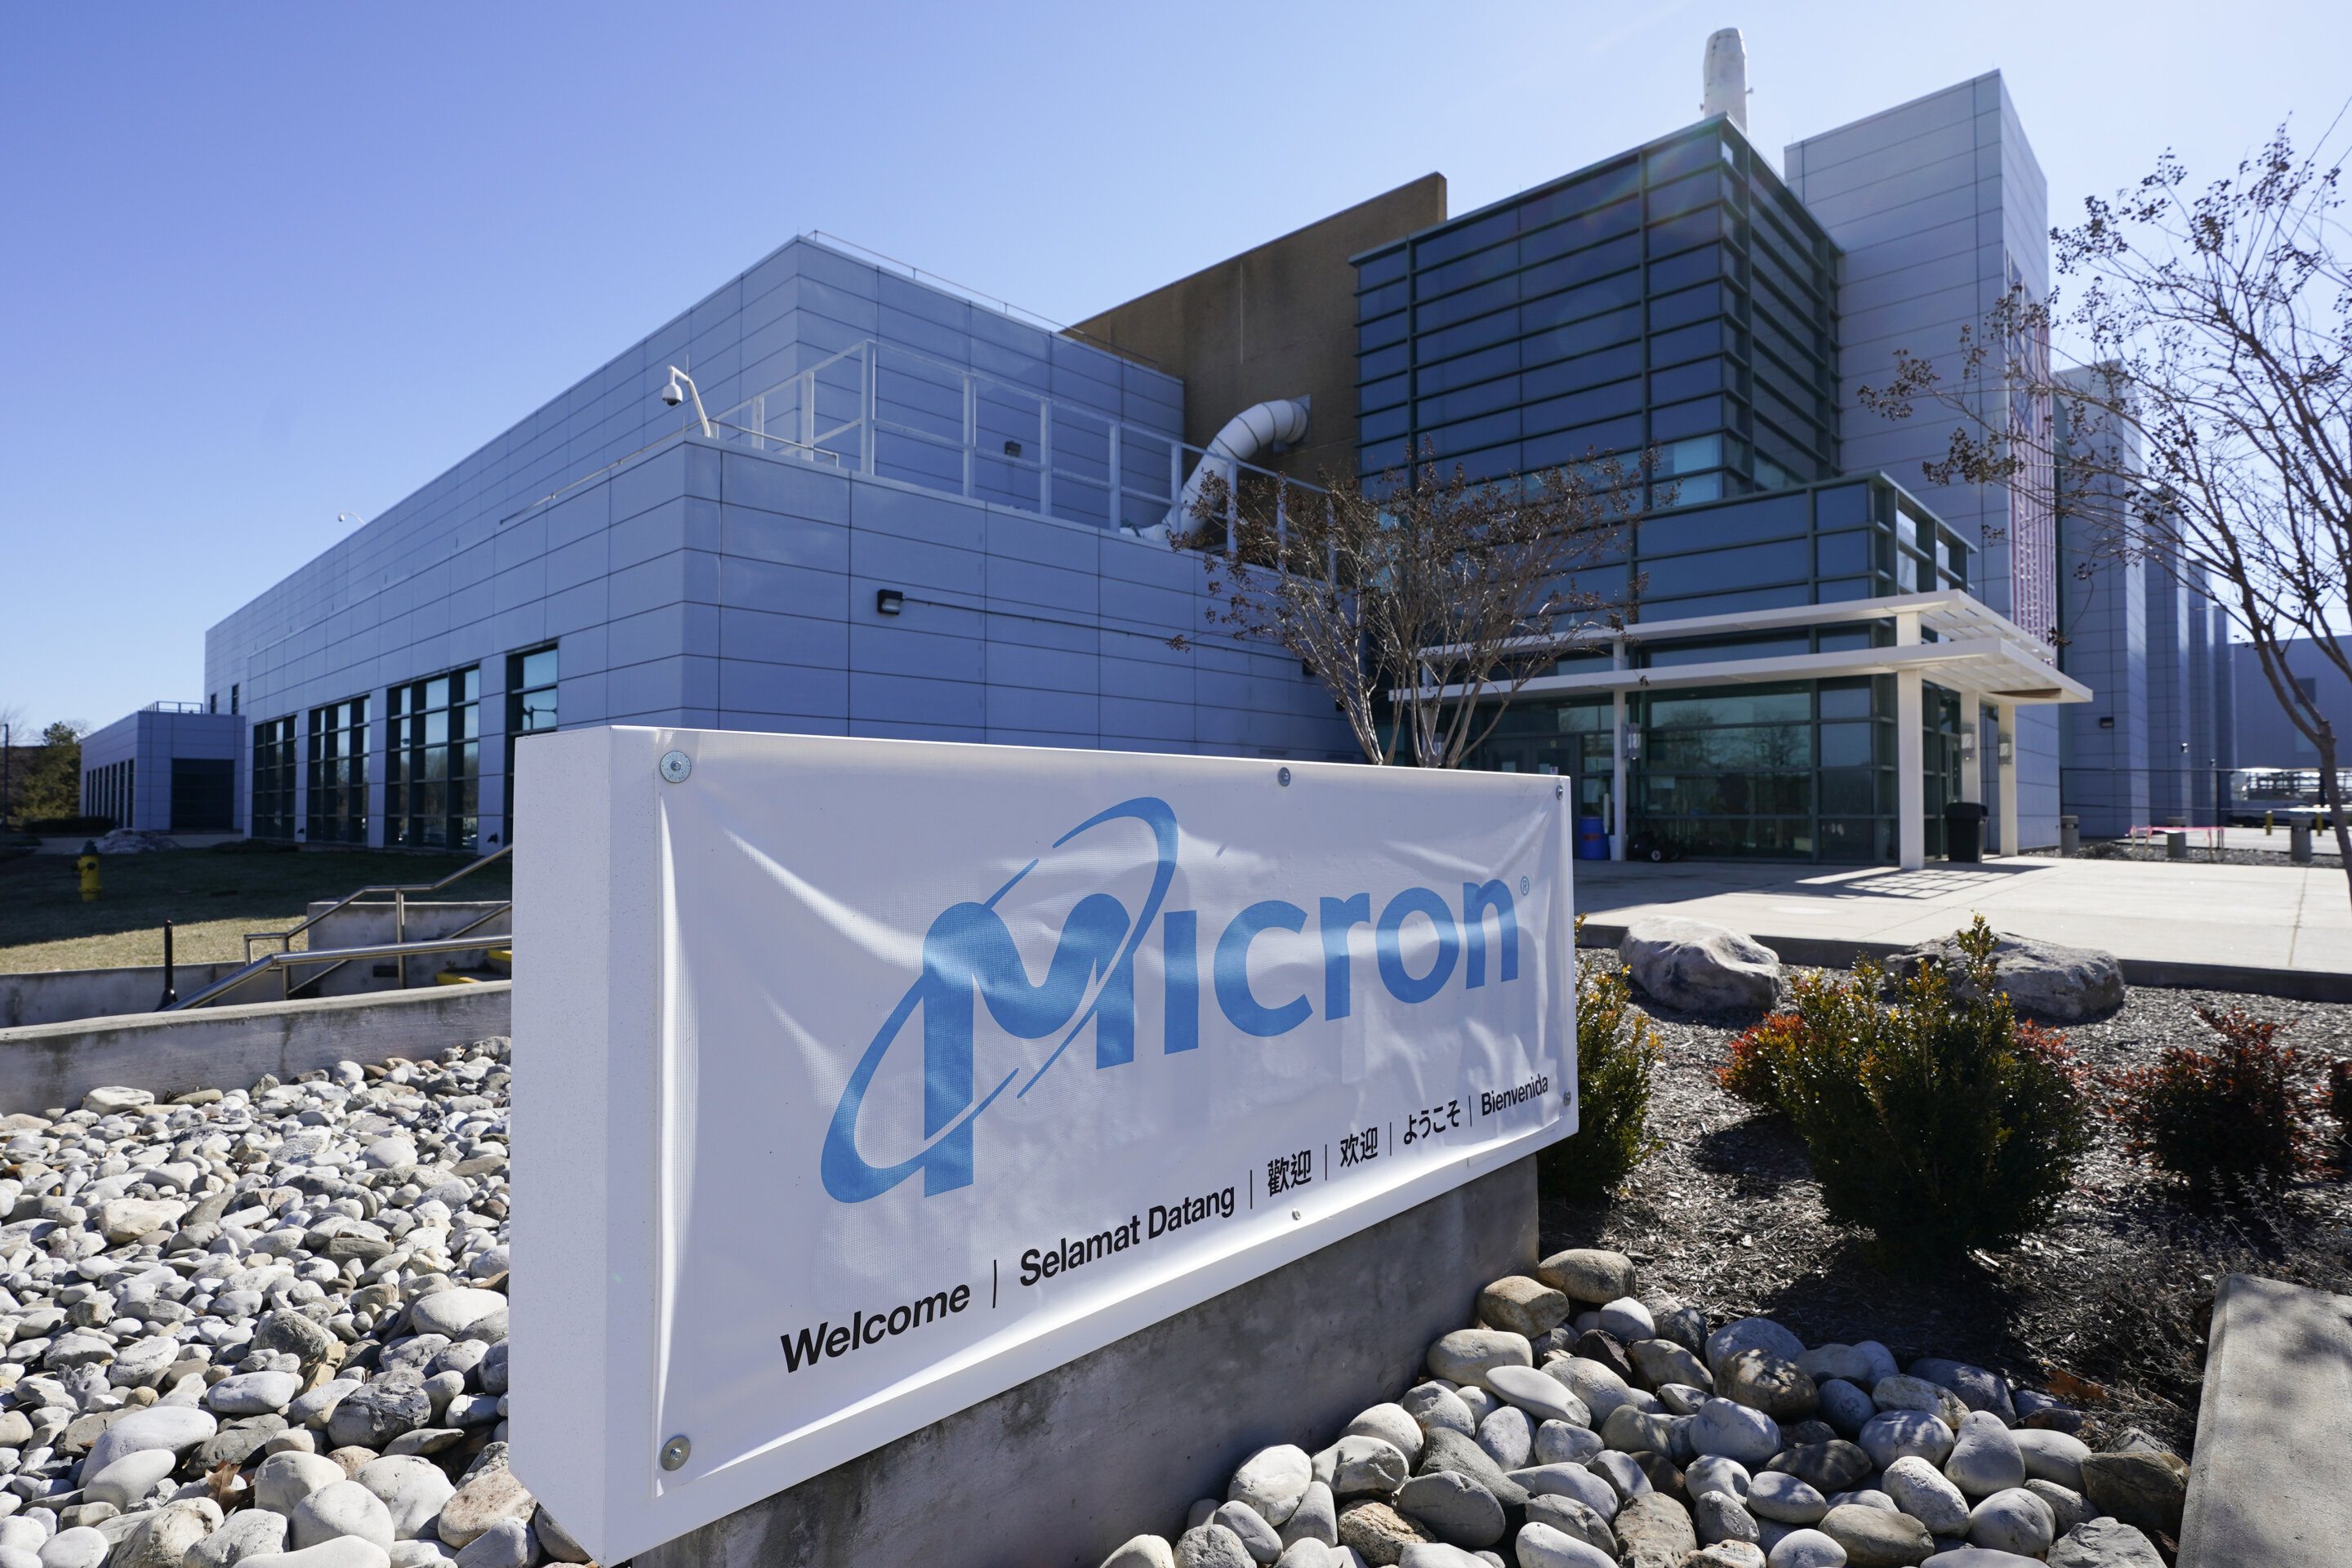 #Micron to invest $15 billion on memory chip plant in Boise